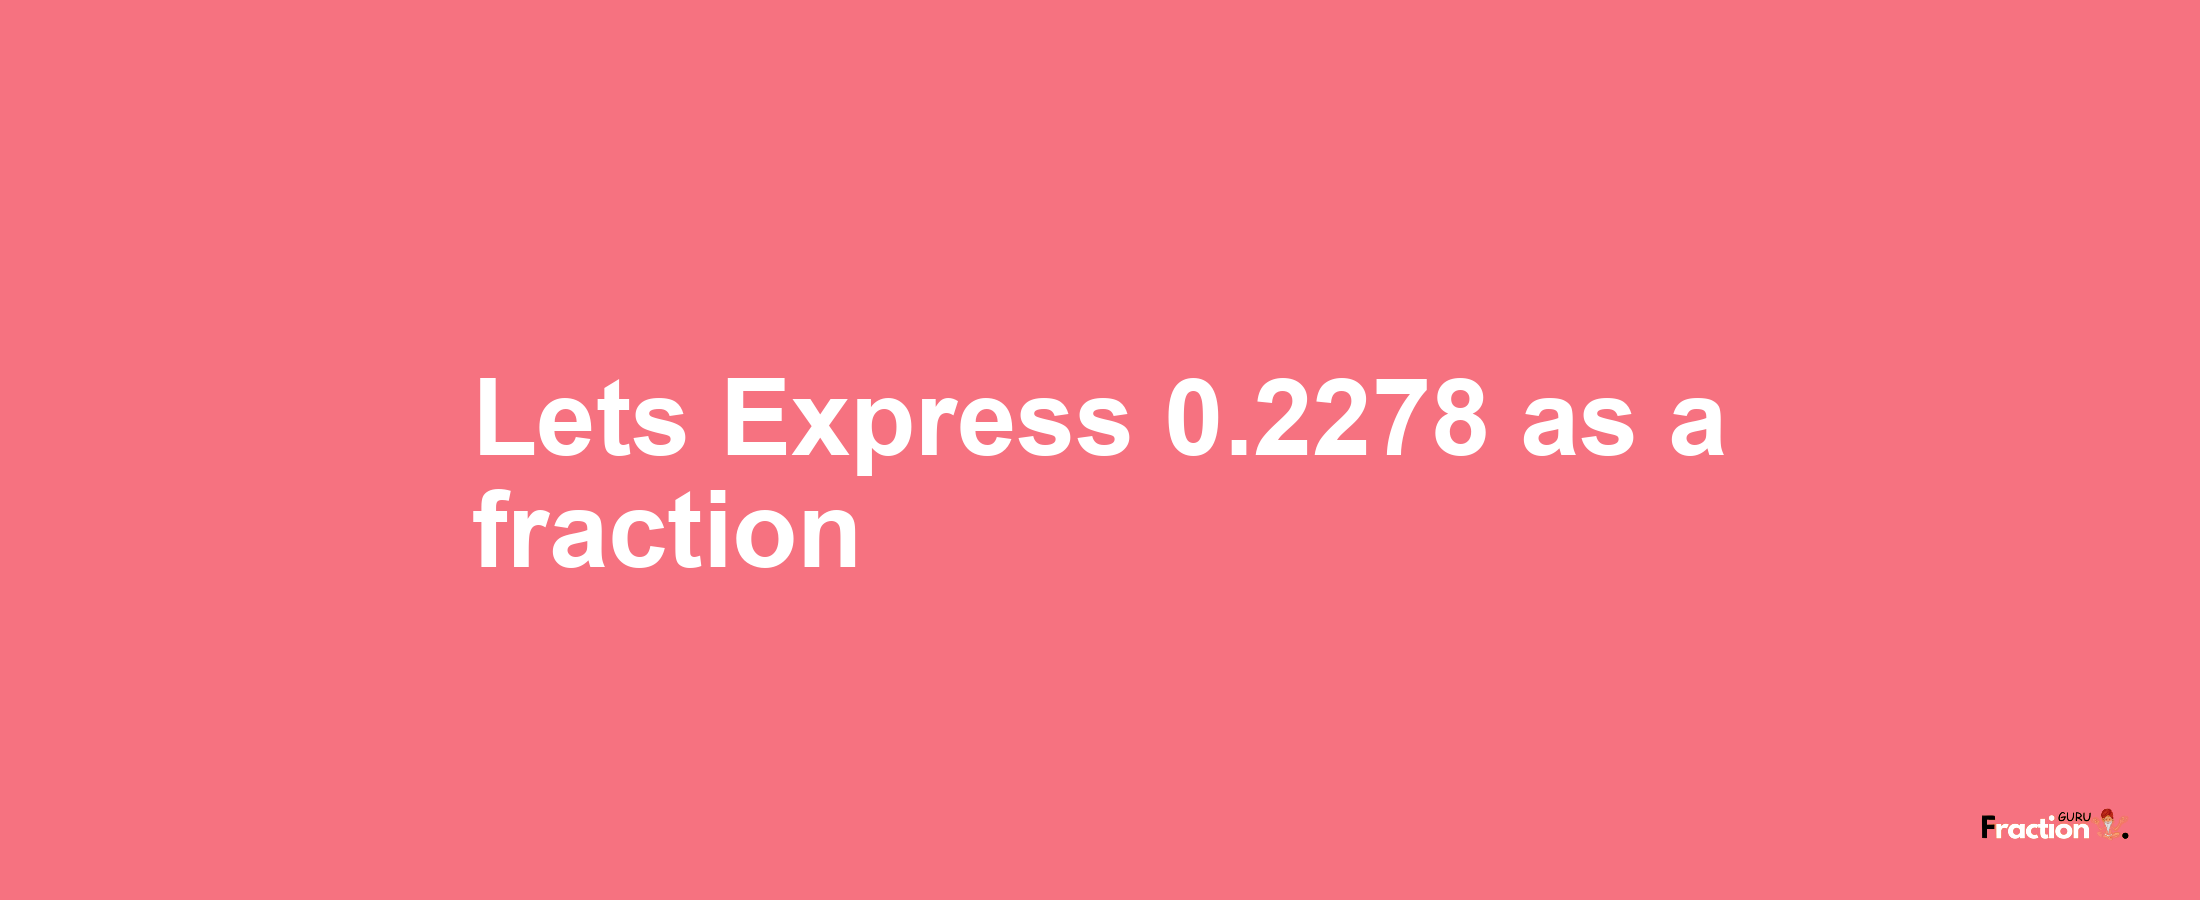 Lets Express 0.2278 as afraction